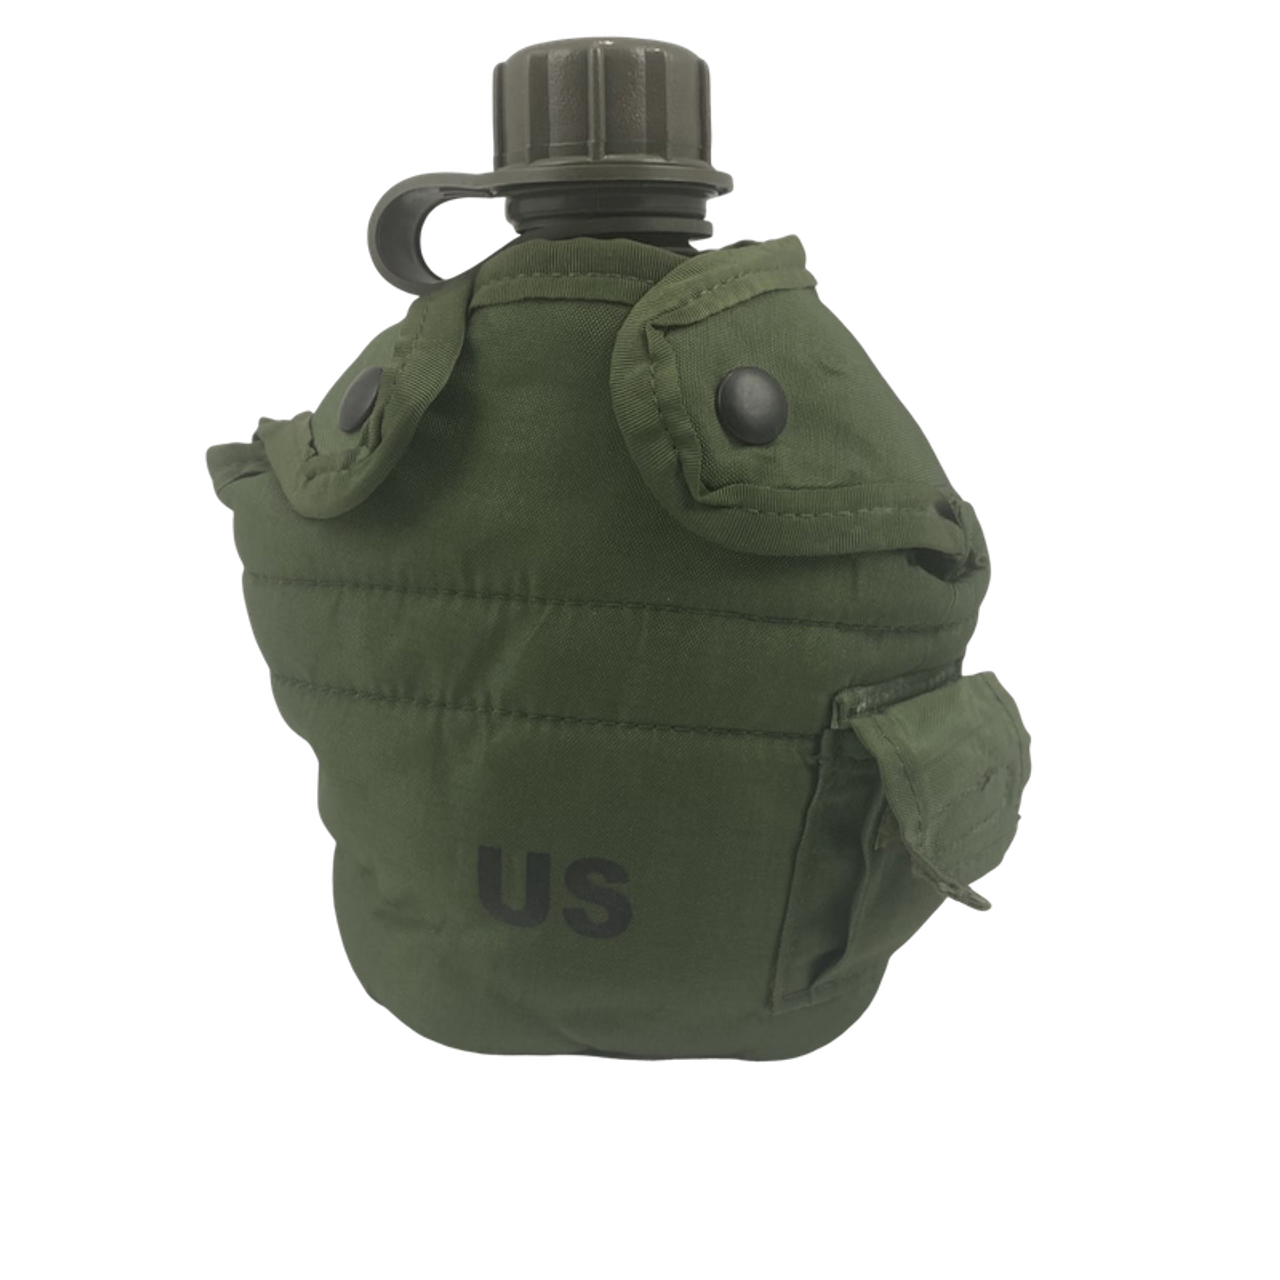 Fox Outdoor Products Gi Collapsible Bladder Canteen Olive Drab 2 Quart